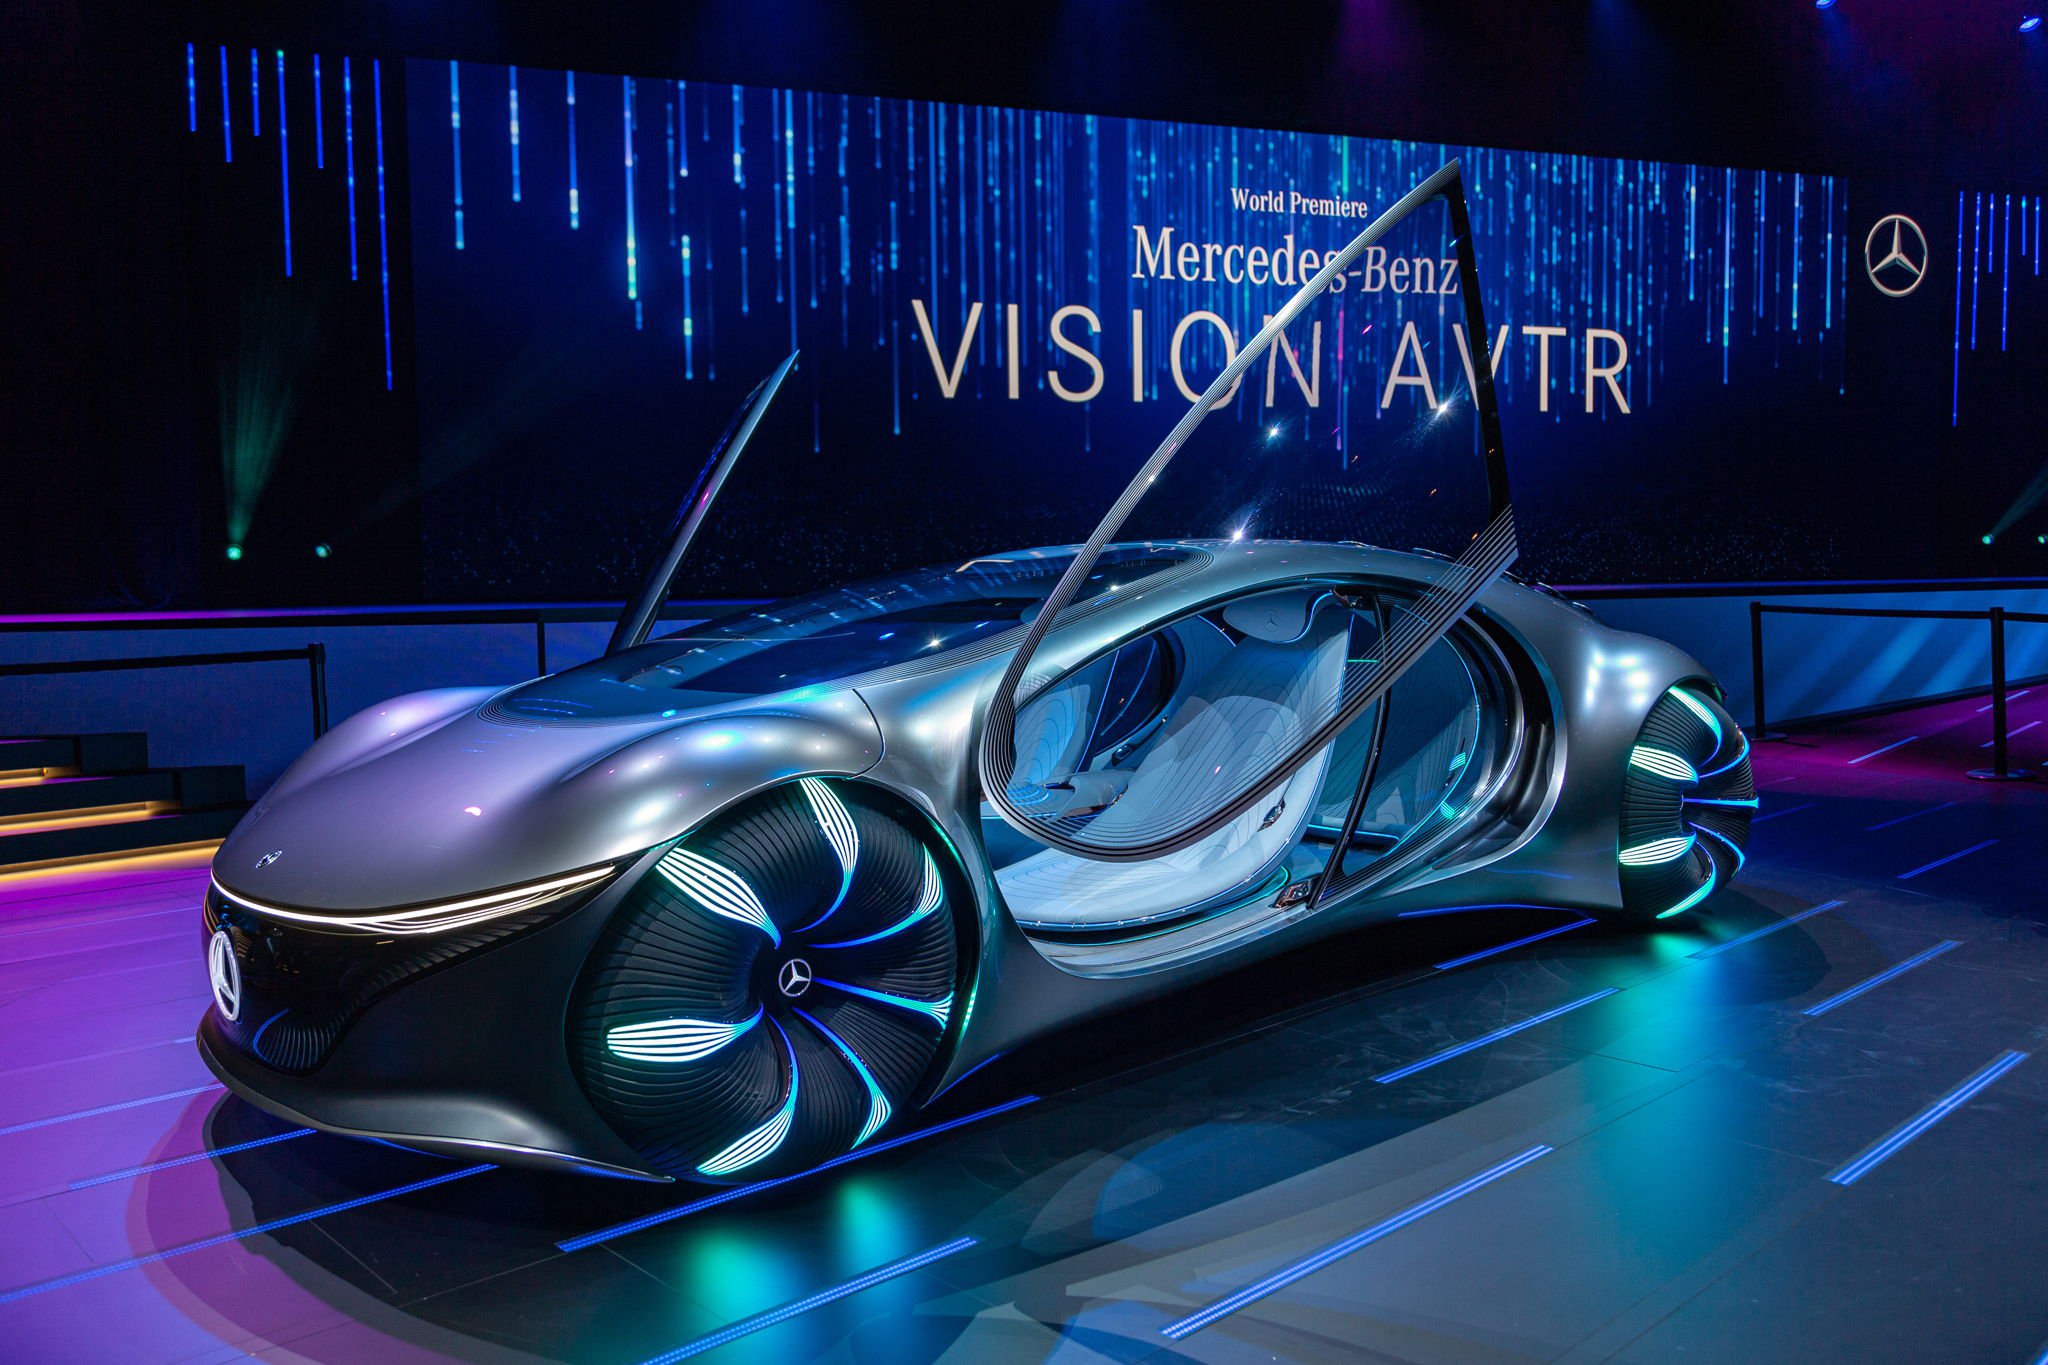 Mercedes Benz Vision Avatar Price CES 2020 Inspired by Avatar  MercedesBenz launches Vision AVTR concept car that moves like a crab  The  Economic Times